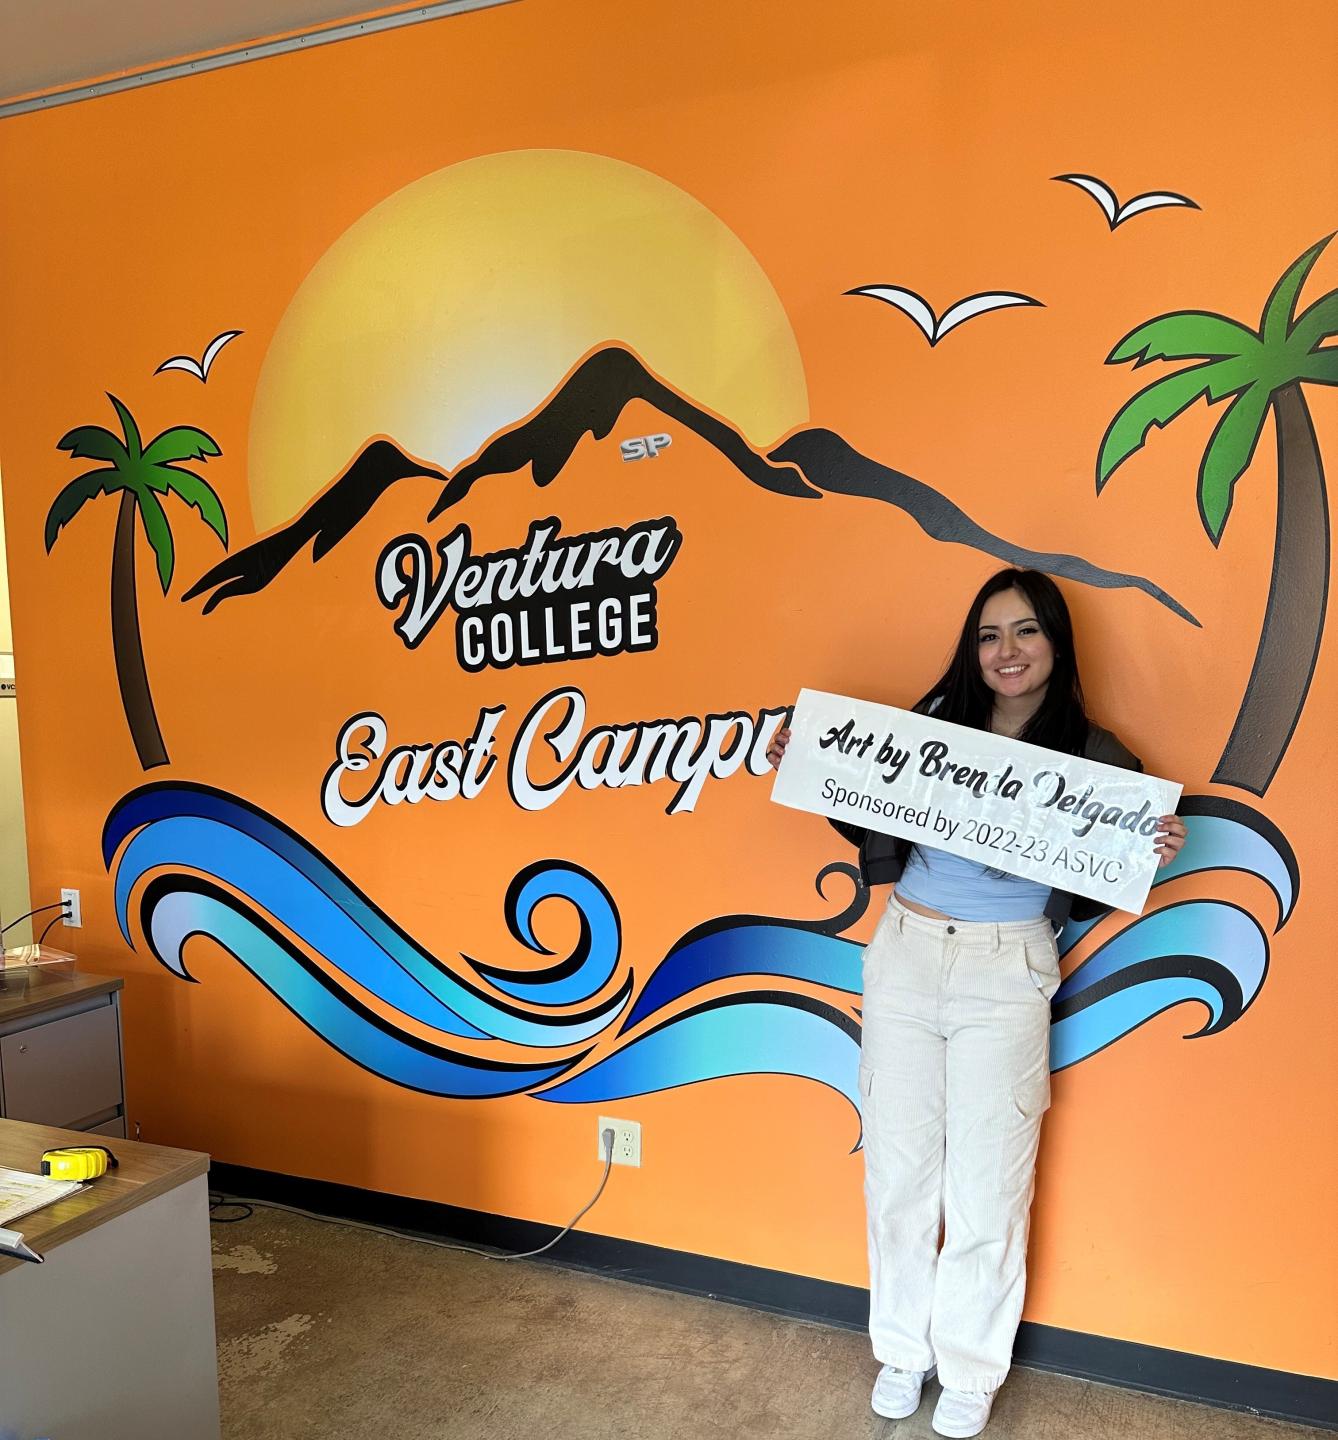 Wall decal of Ventura College East Campus with artist posing 